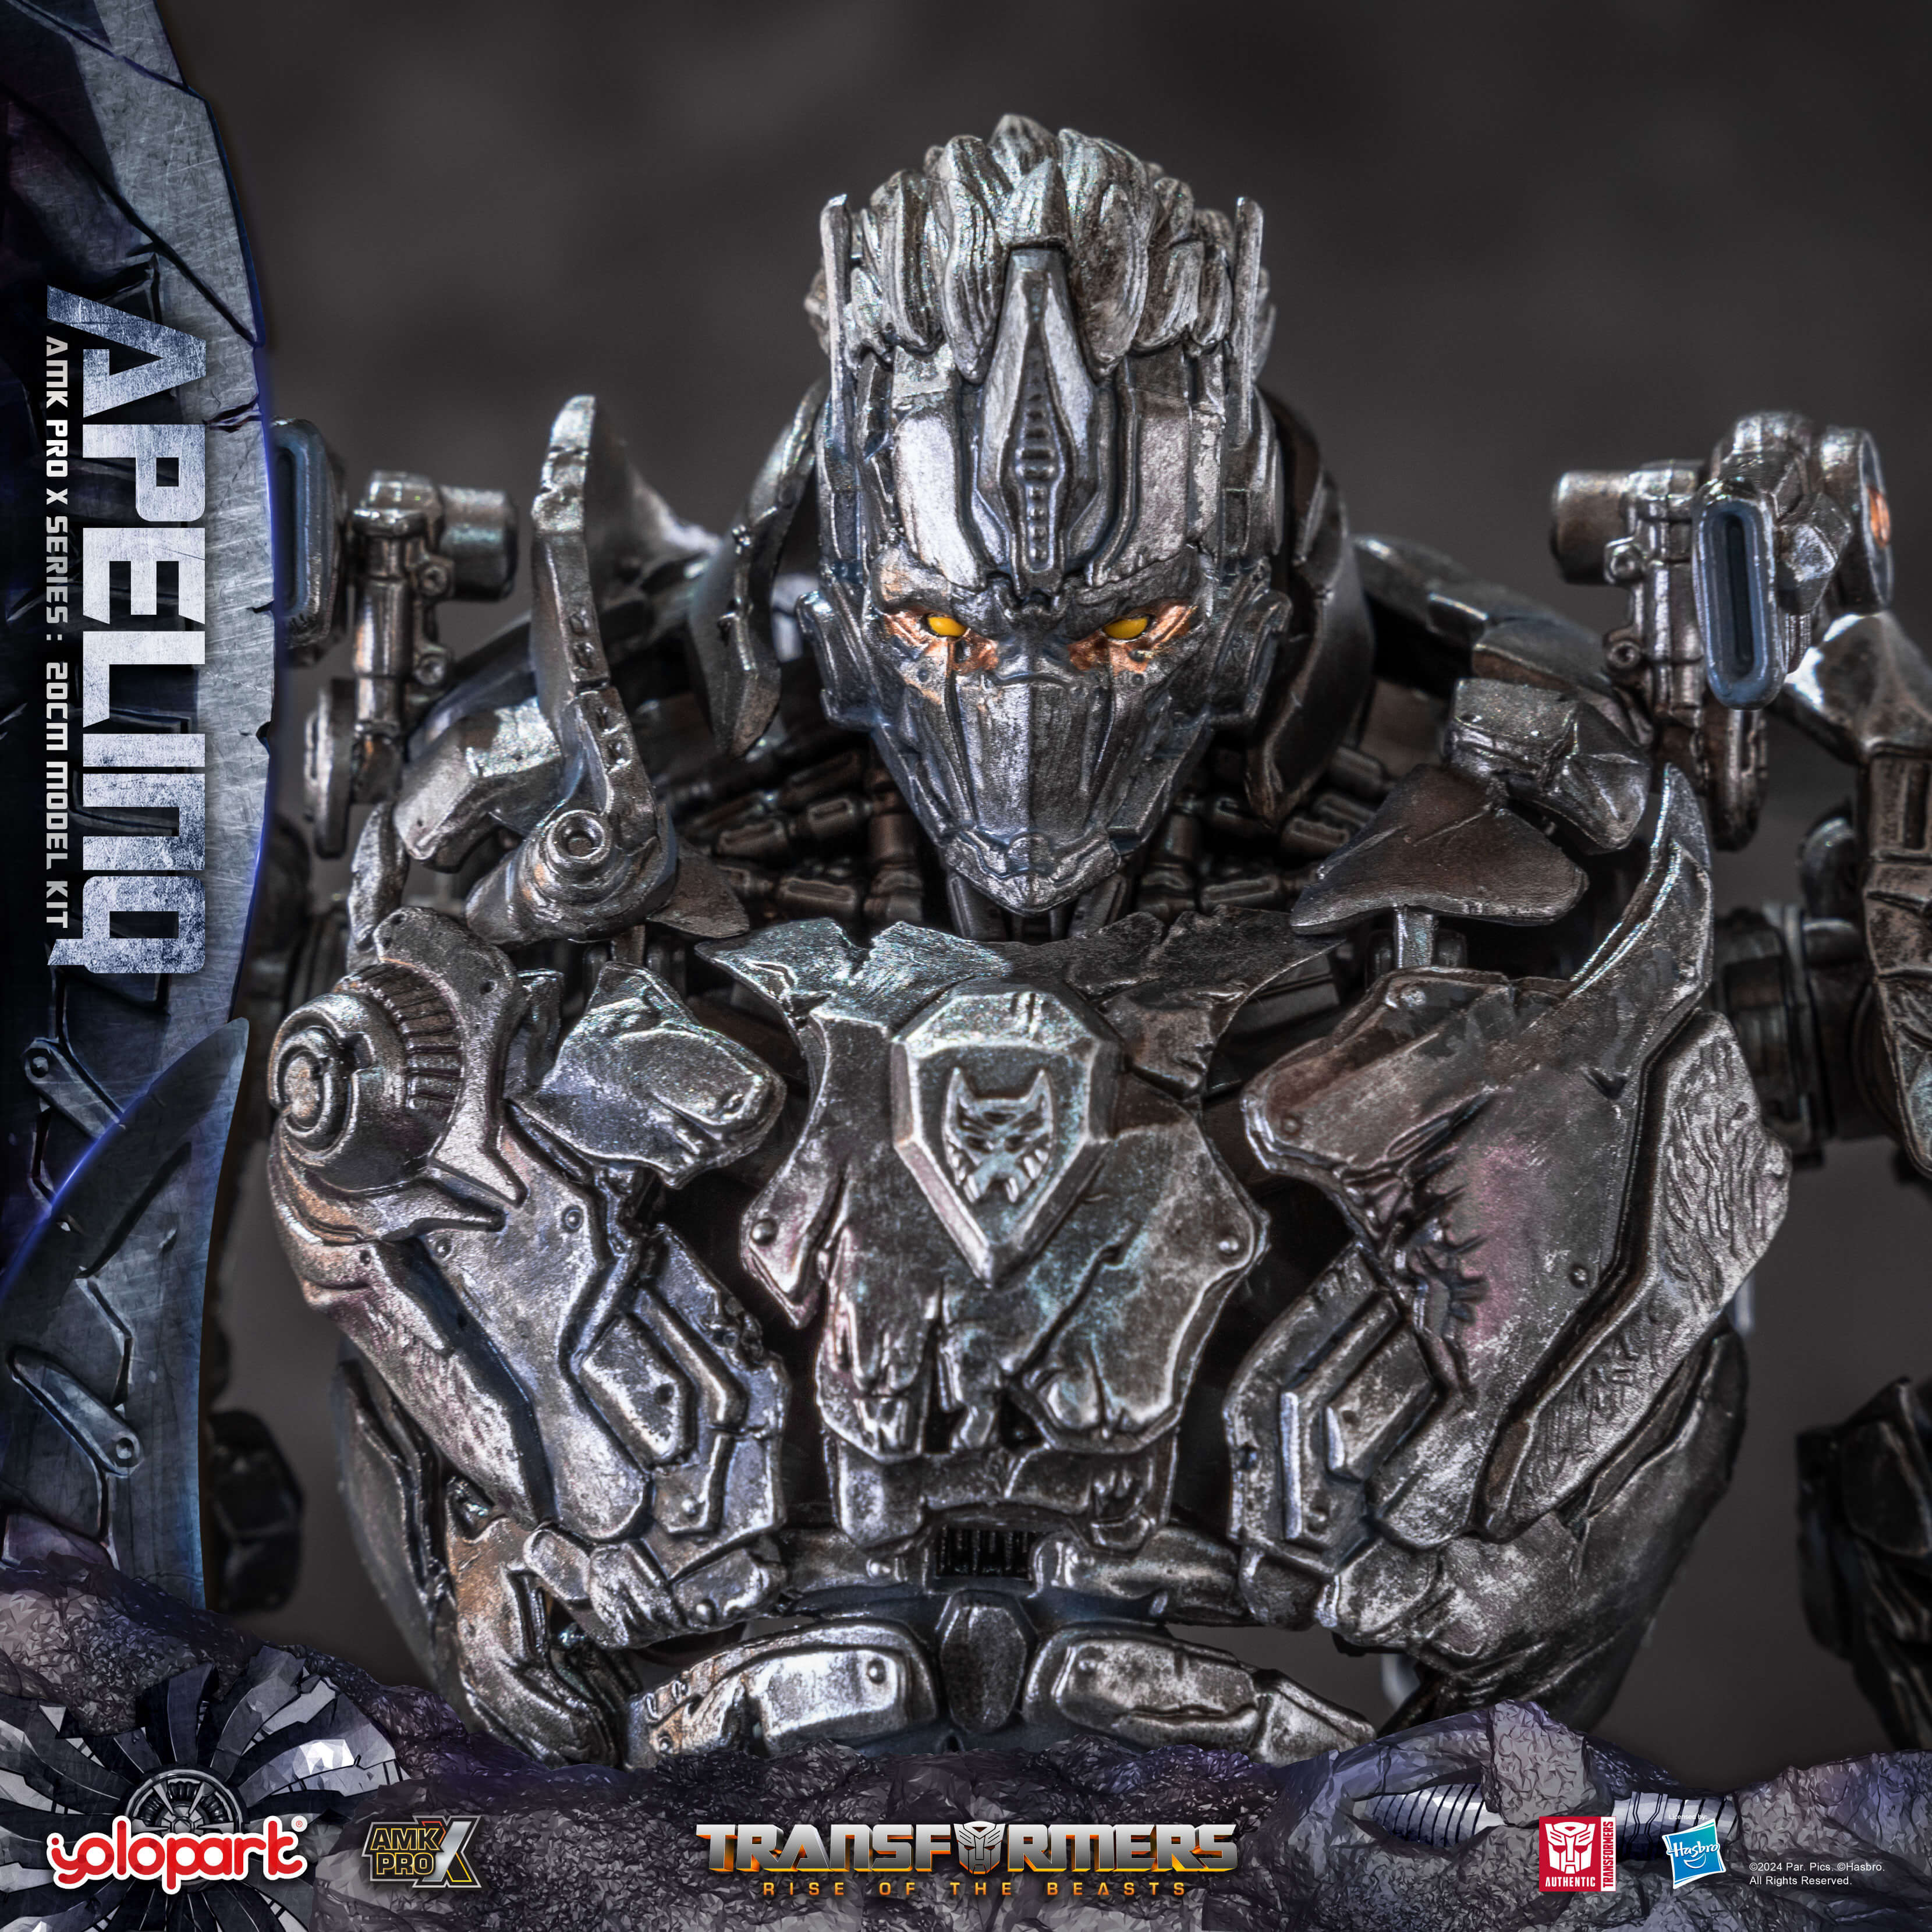 [PRE-ORDER] AMK PRO X Series Transformers Movie 7: Rise of The Beasts - 20cm Apelinq Model Kit